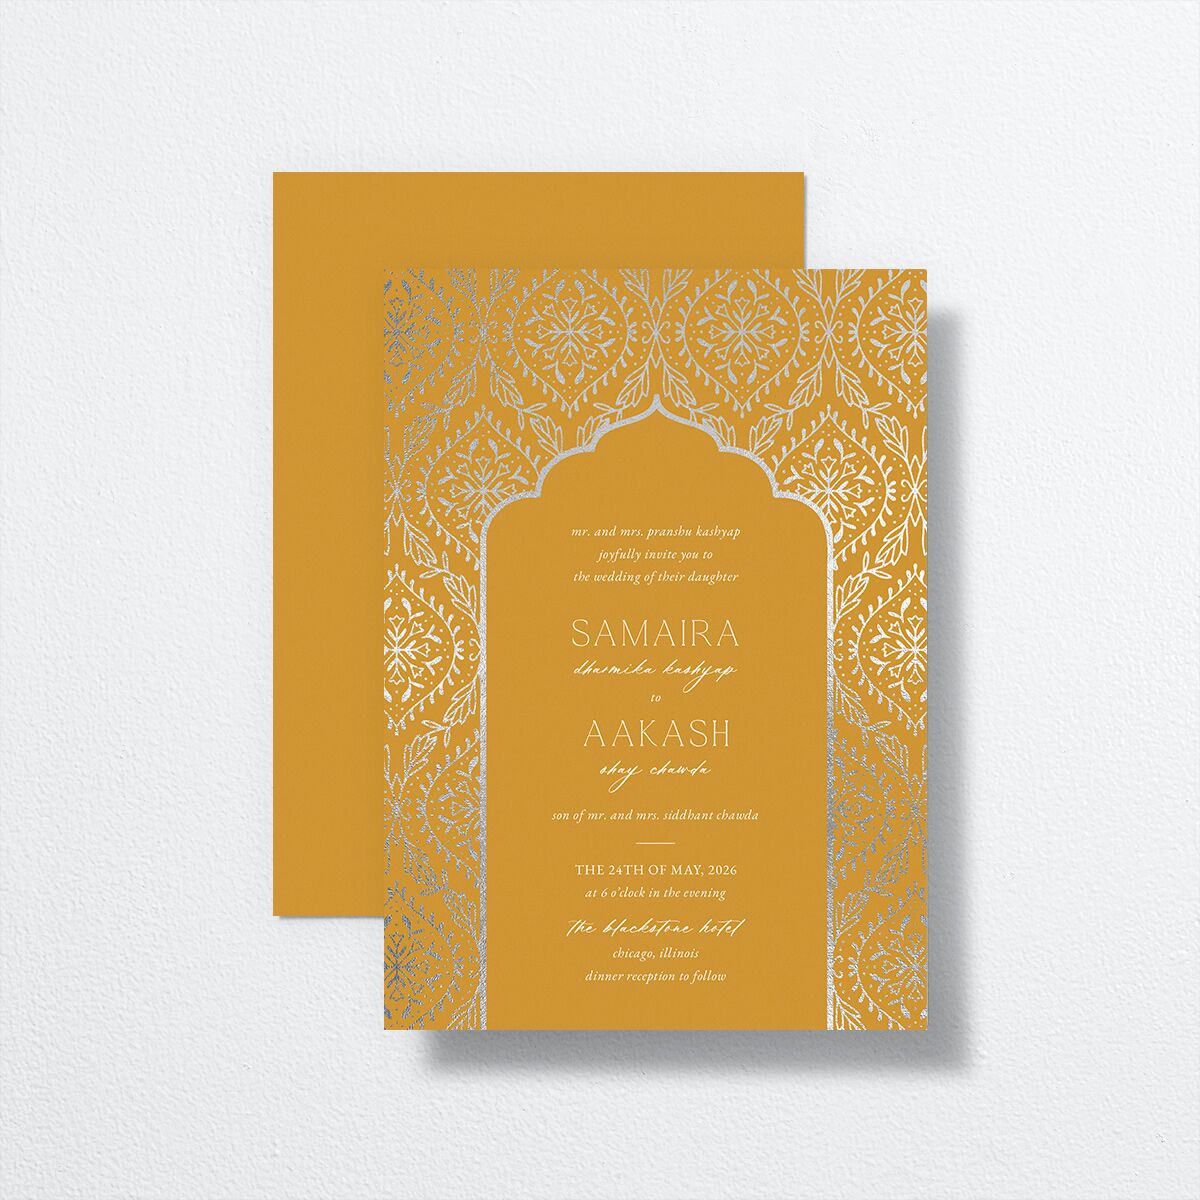 Gilded Lehenga Wedding Invitations front-and-back in gold